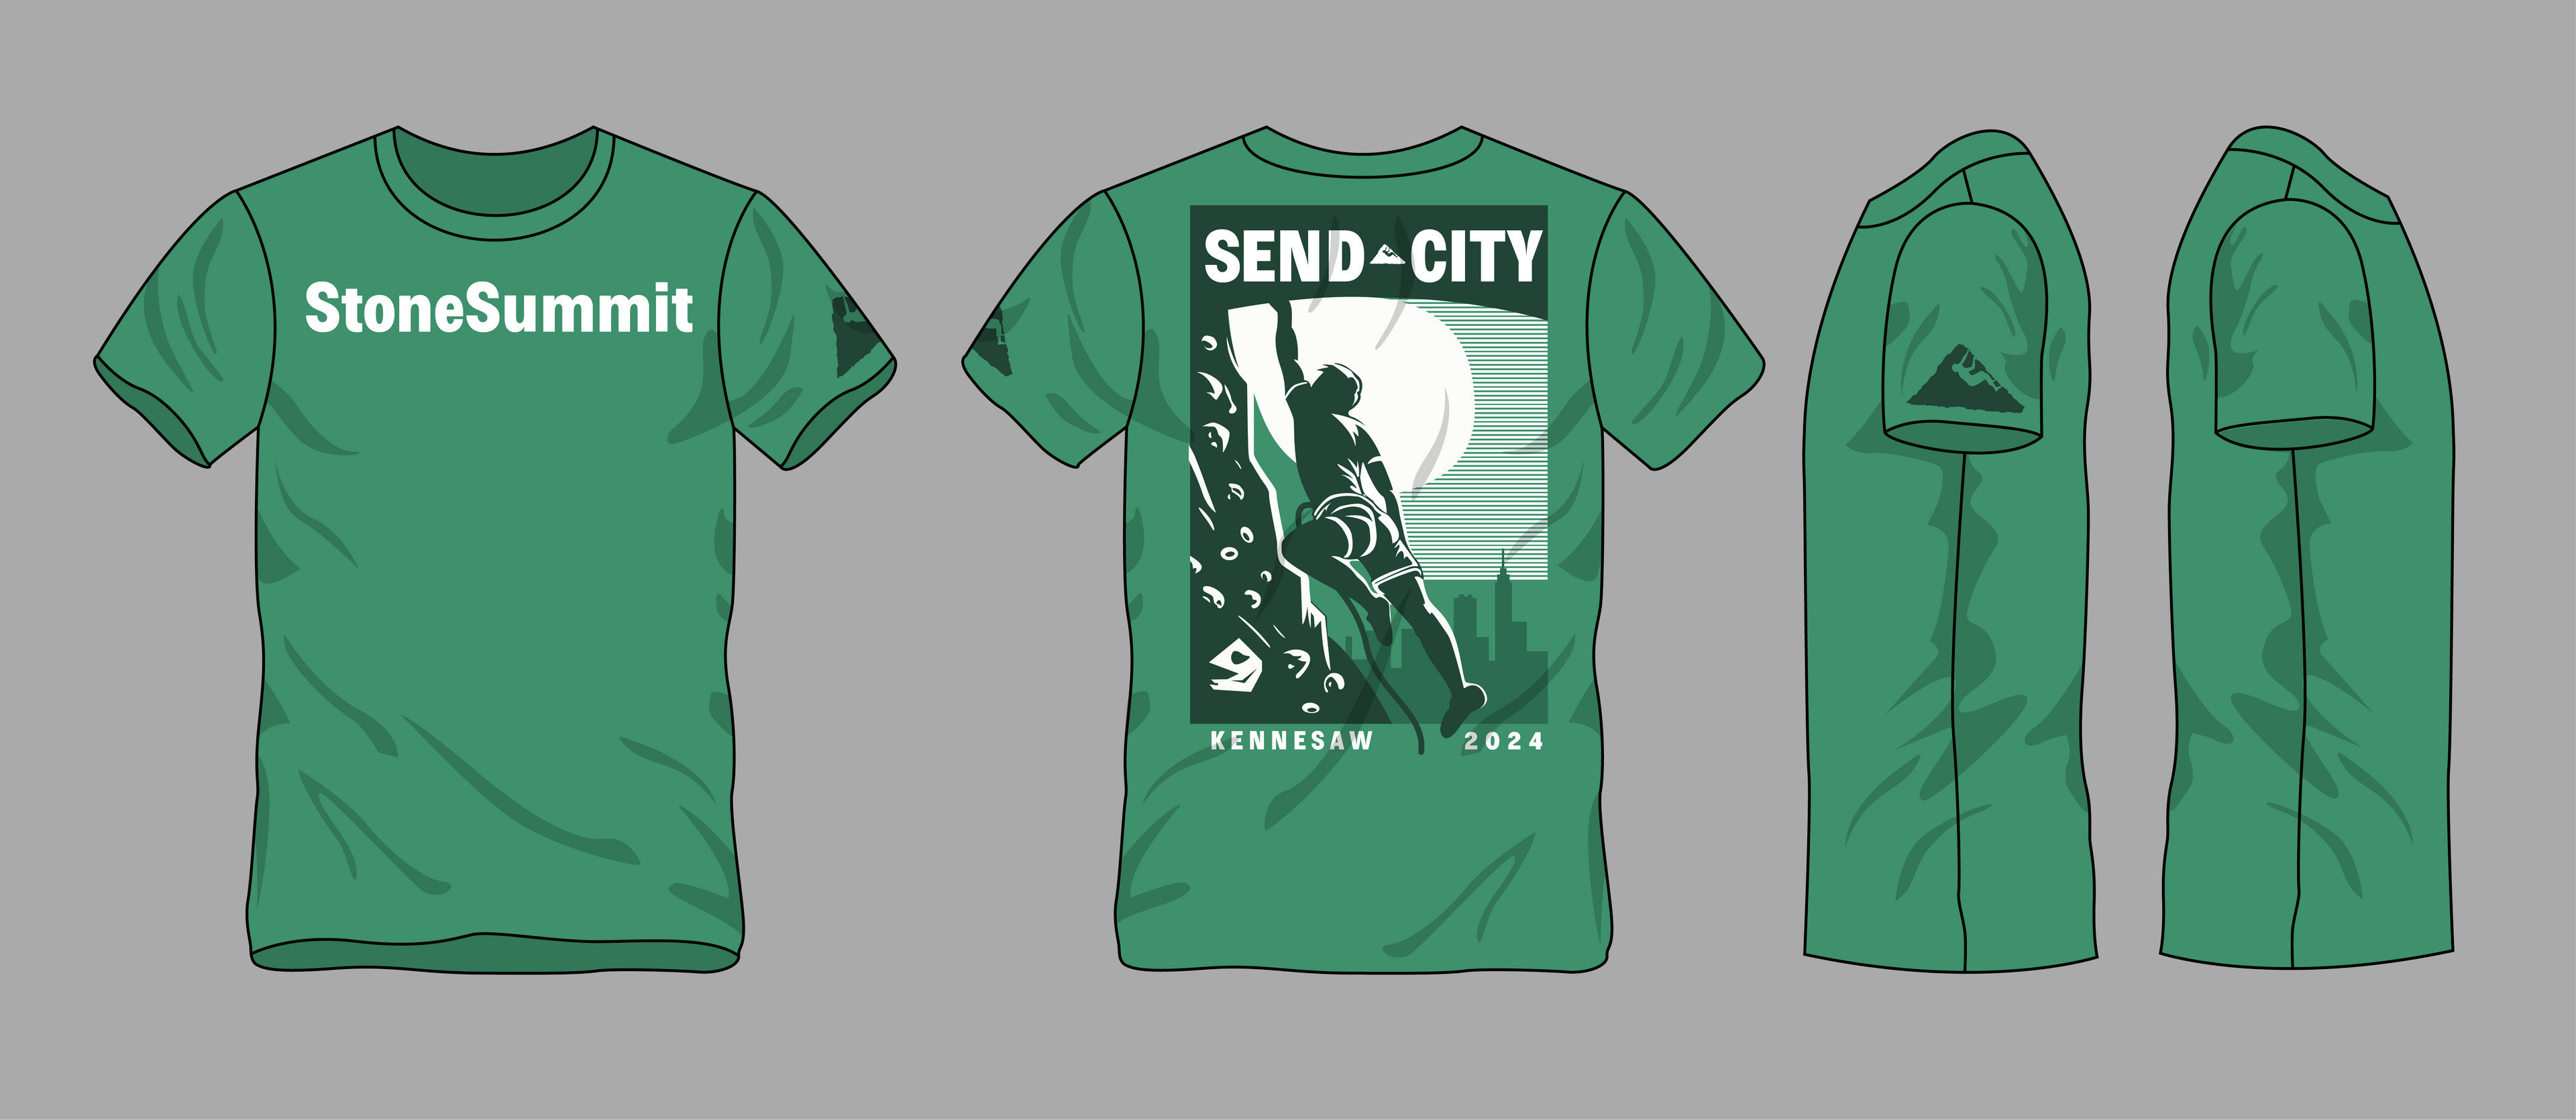 *Unused* 2024 T-shirt concept for Stone Summit Climbing and Fitness Center's annual Send City sport climbing competition.